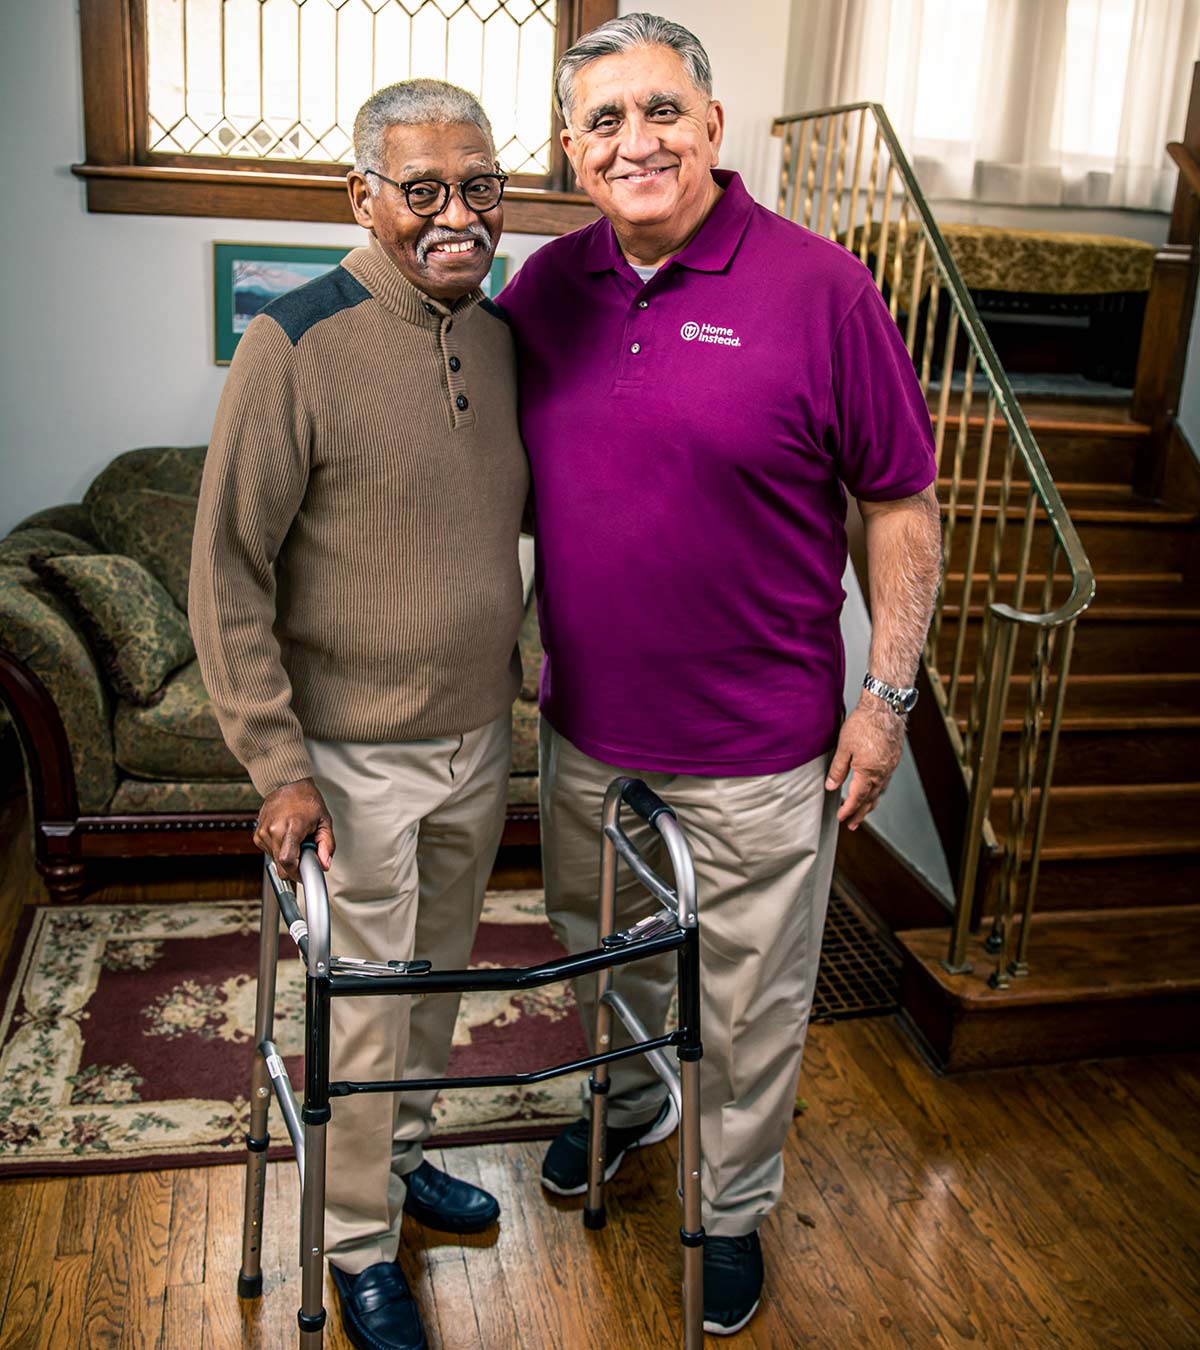 Home Instead CAREGiver and senior smiling while standing in home